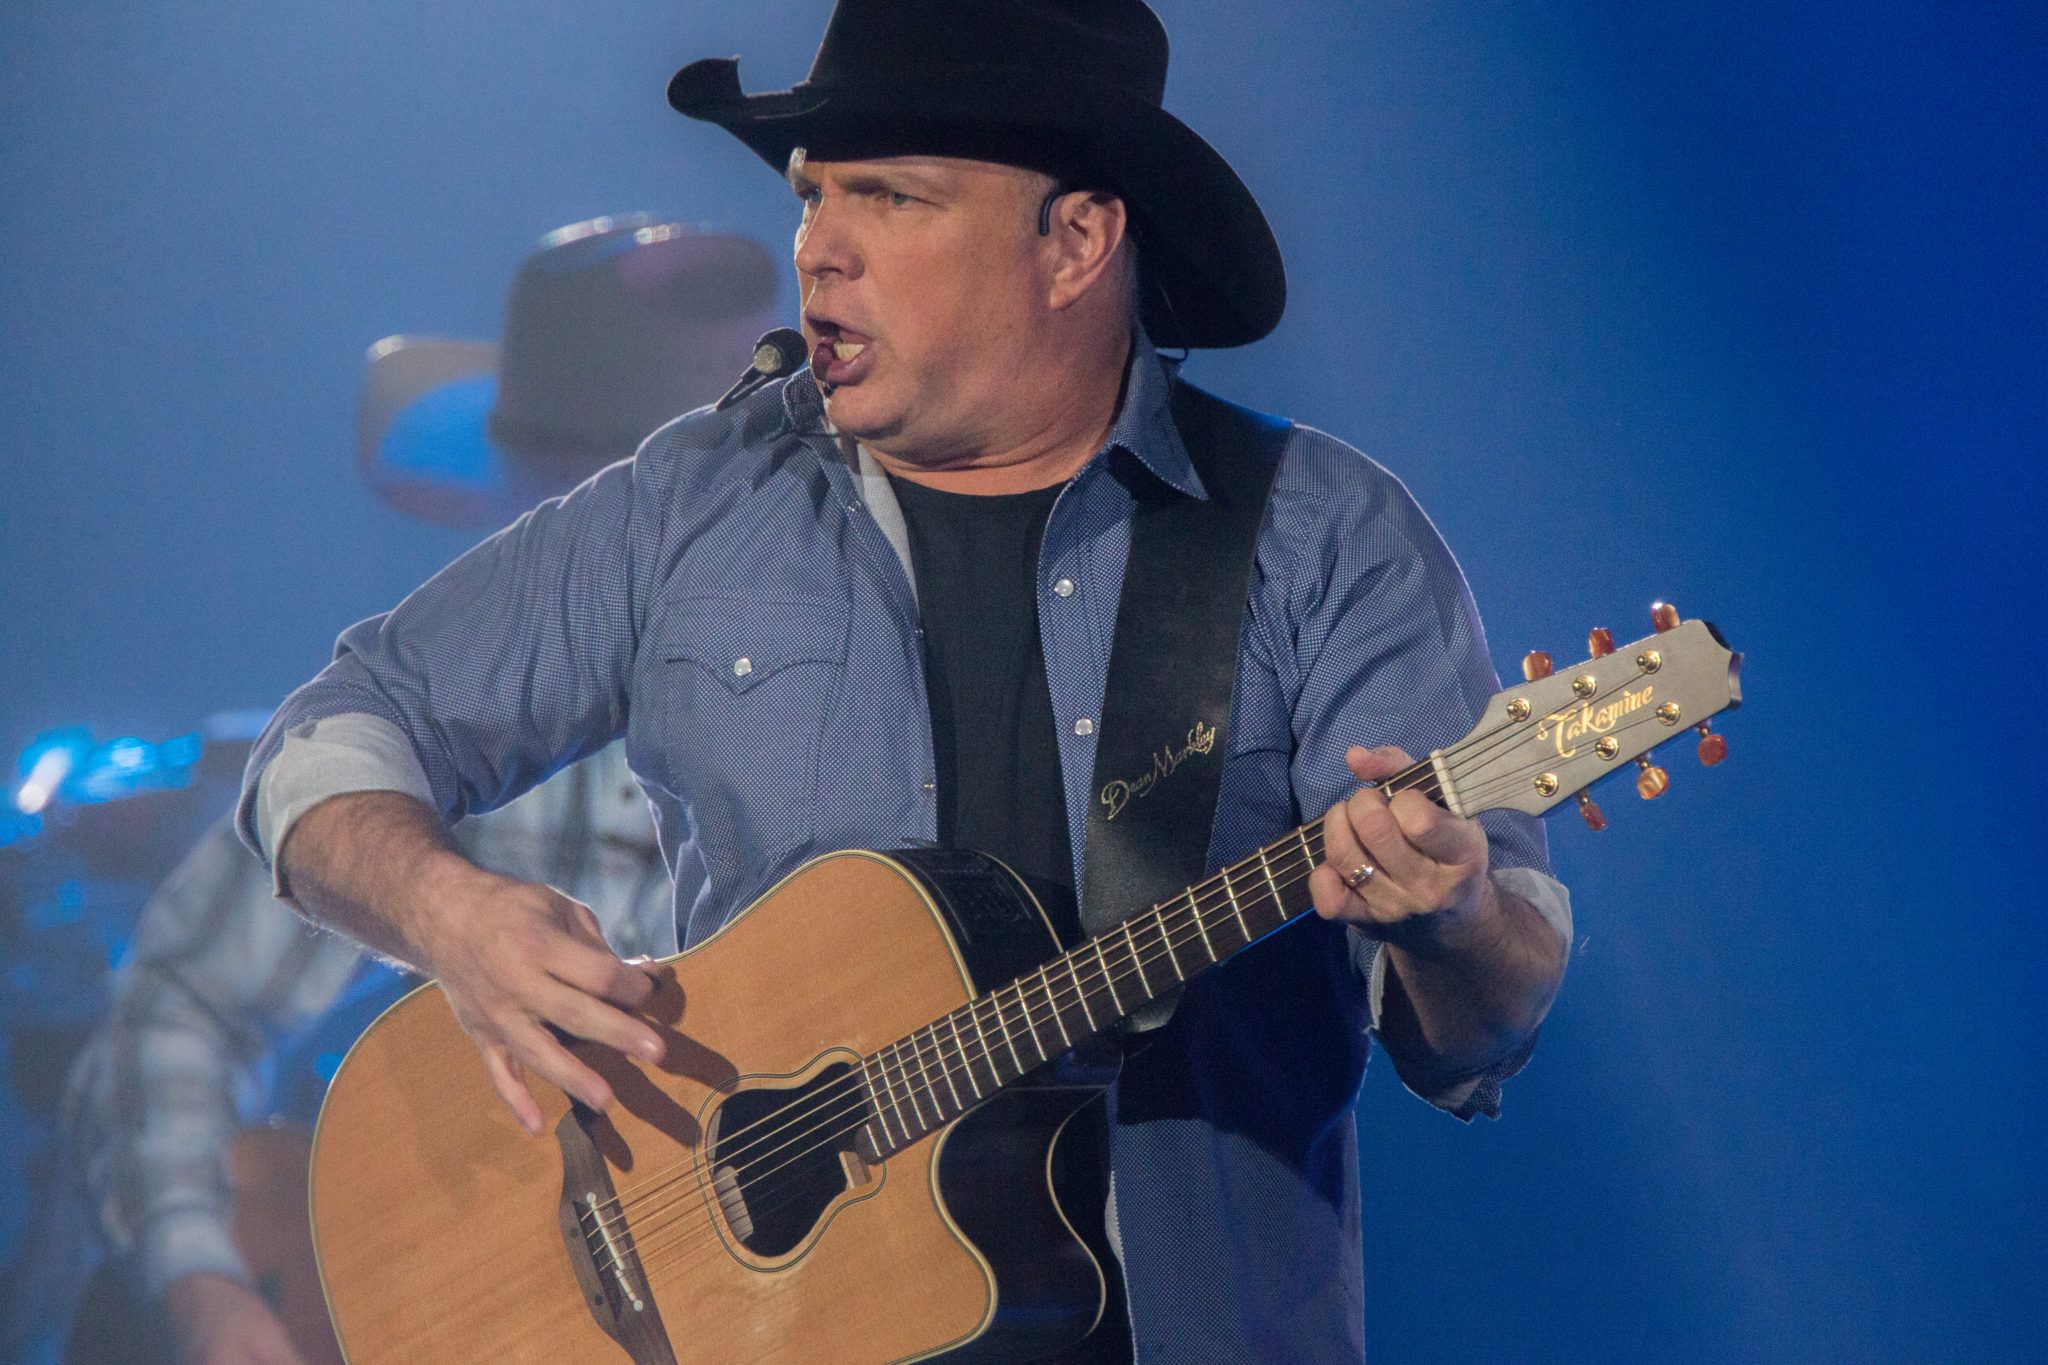 Brace yourselves… The Garth Brooks gigs are coming